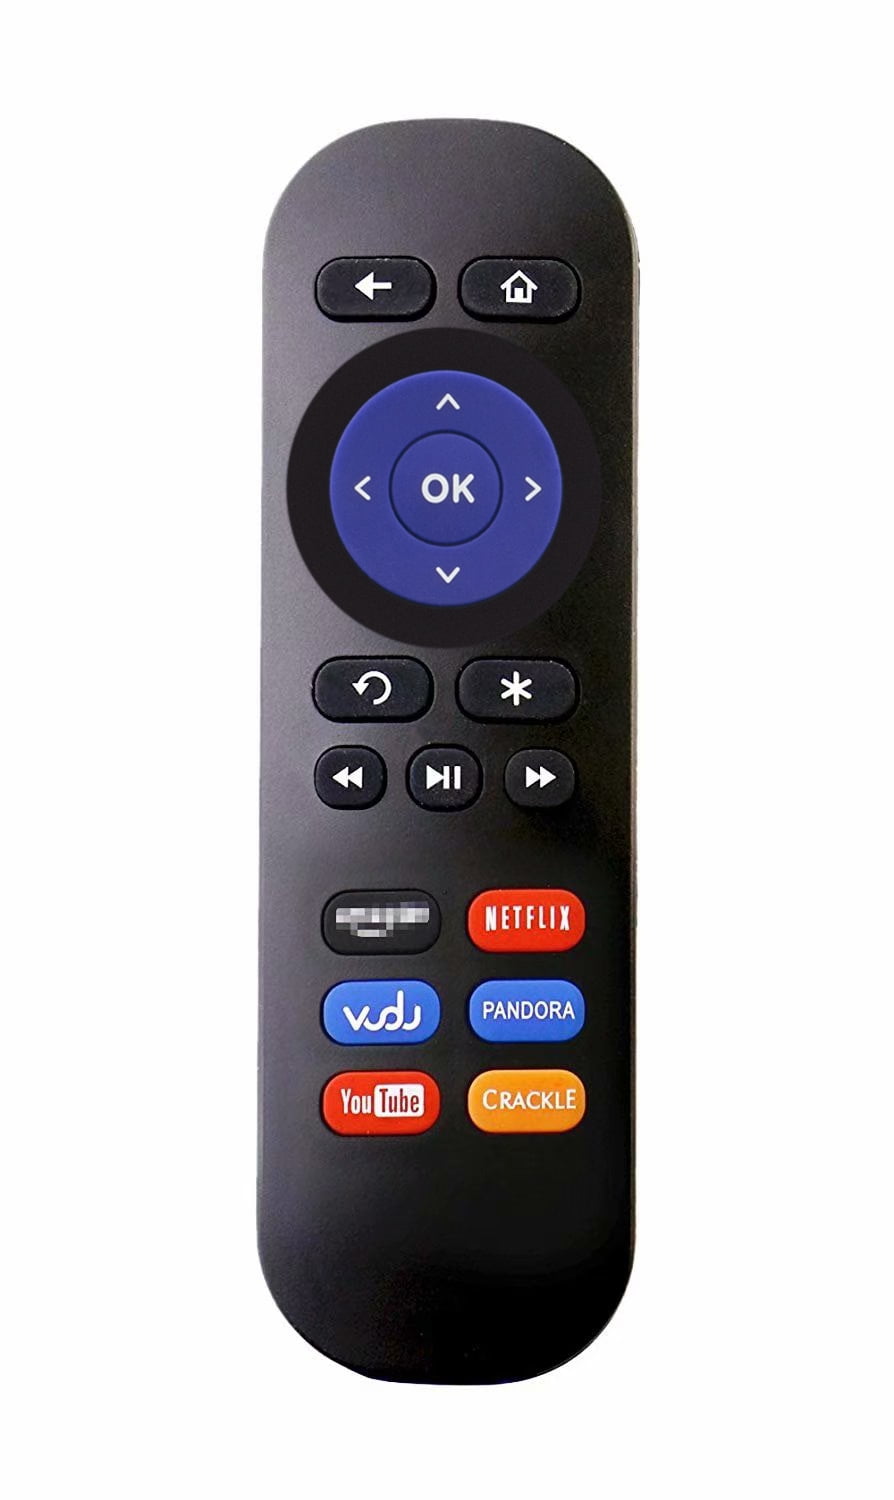 New IR Remote Control for 1 2 3 4 LT HD XD XS Streaming Player with Netflix Vudu YouTube Crackle Key -